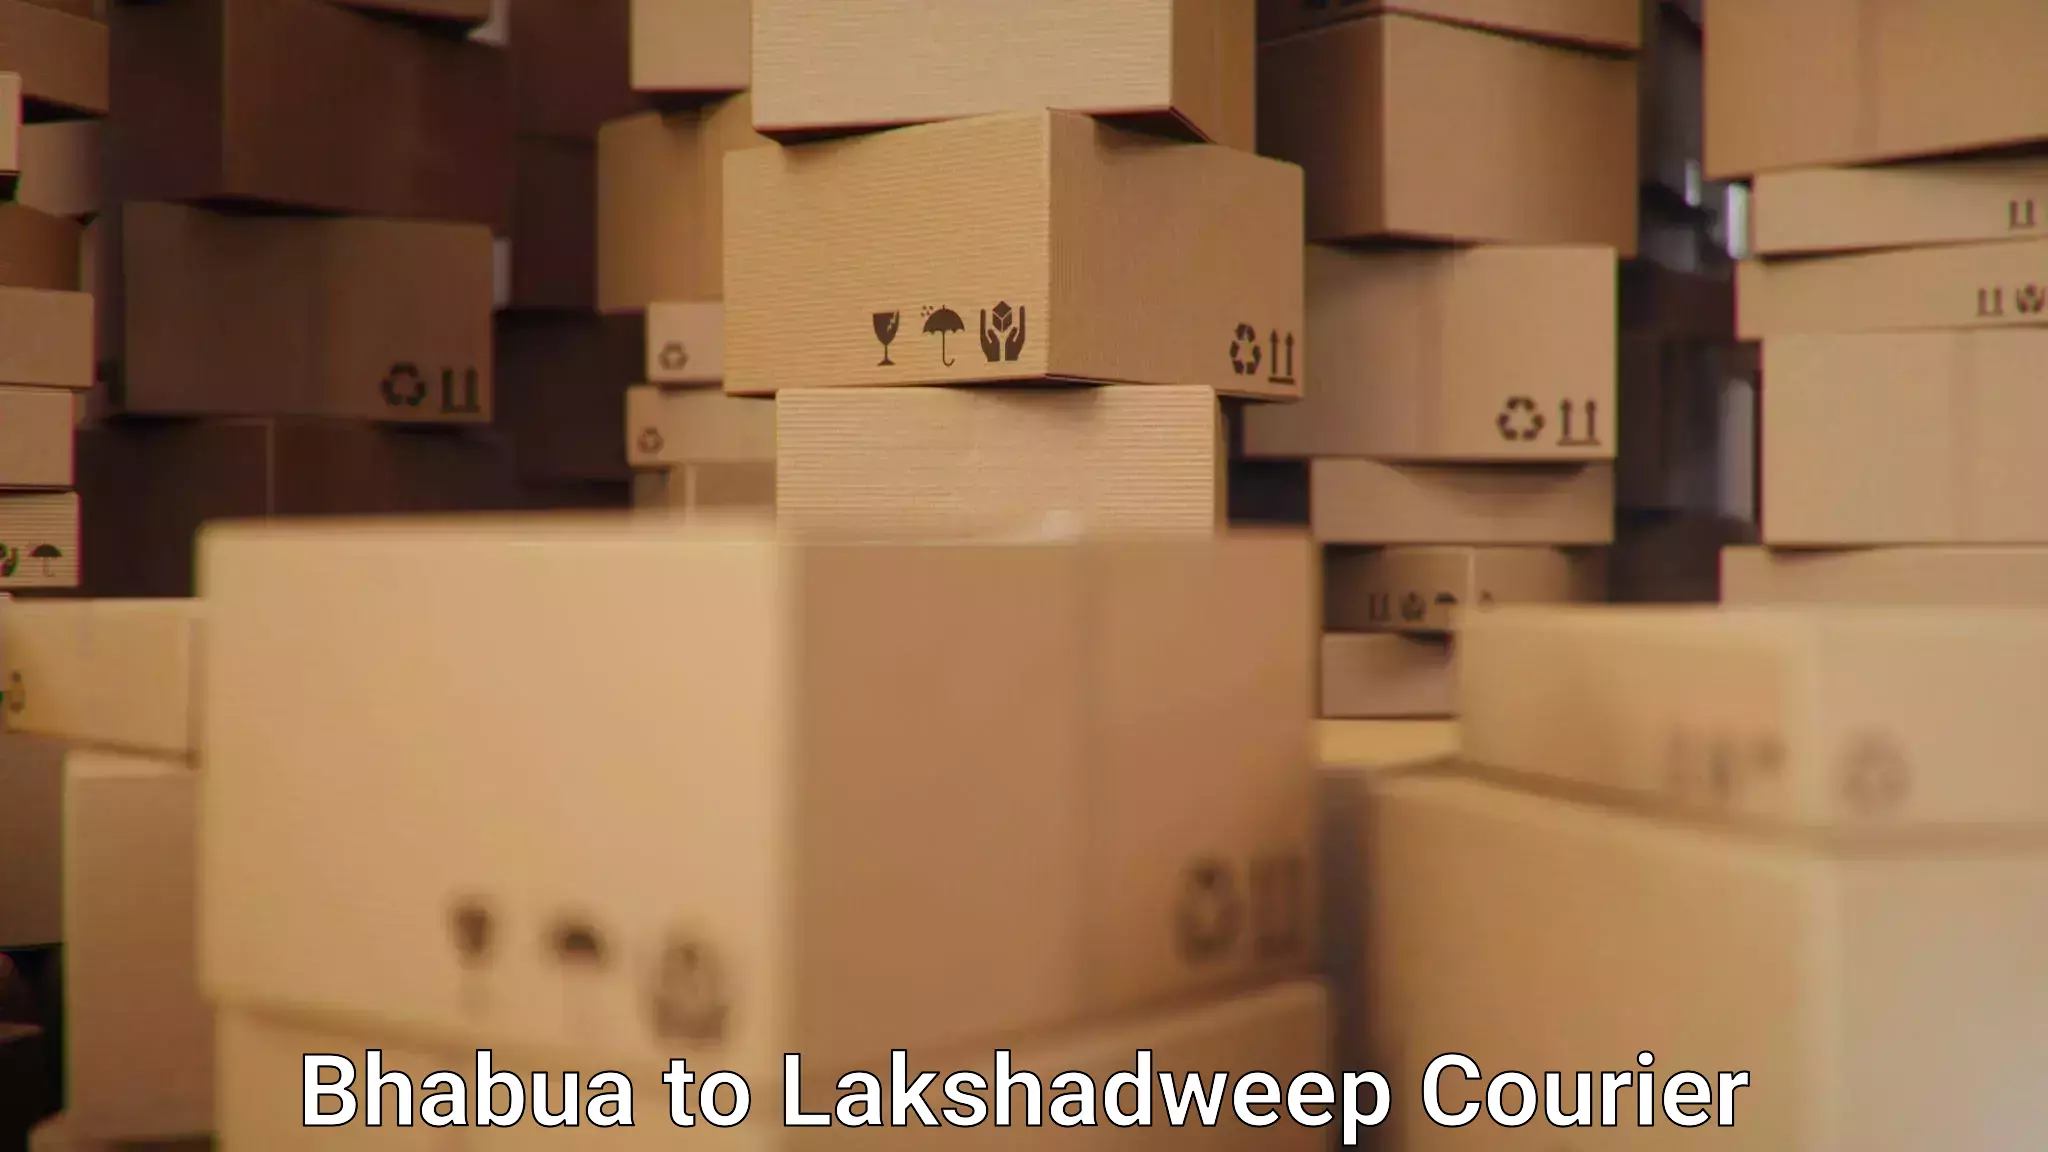 Tailored delivery services Bhabua to Lakshadweep